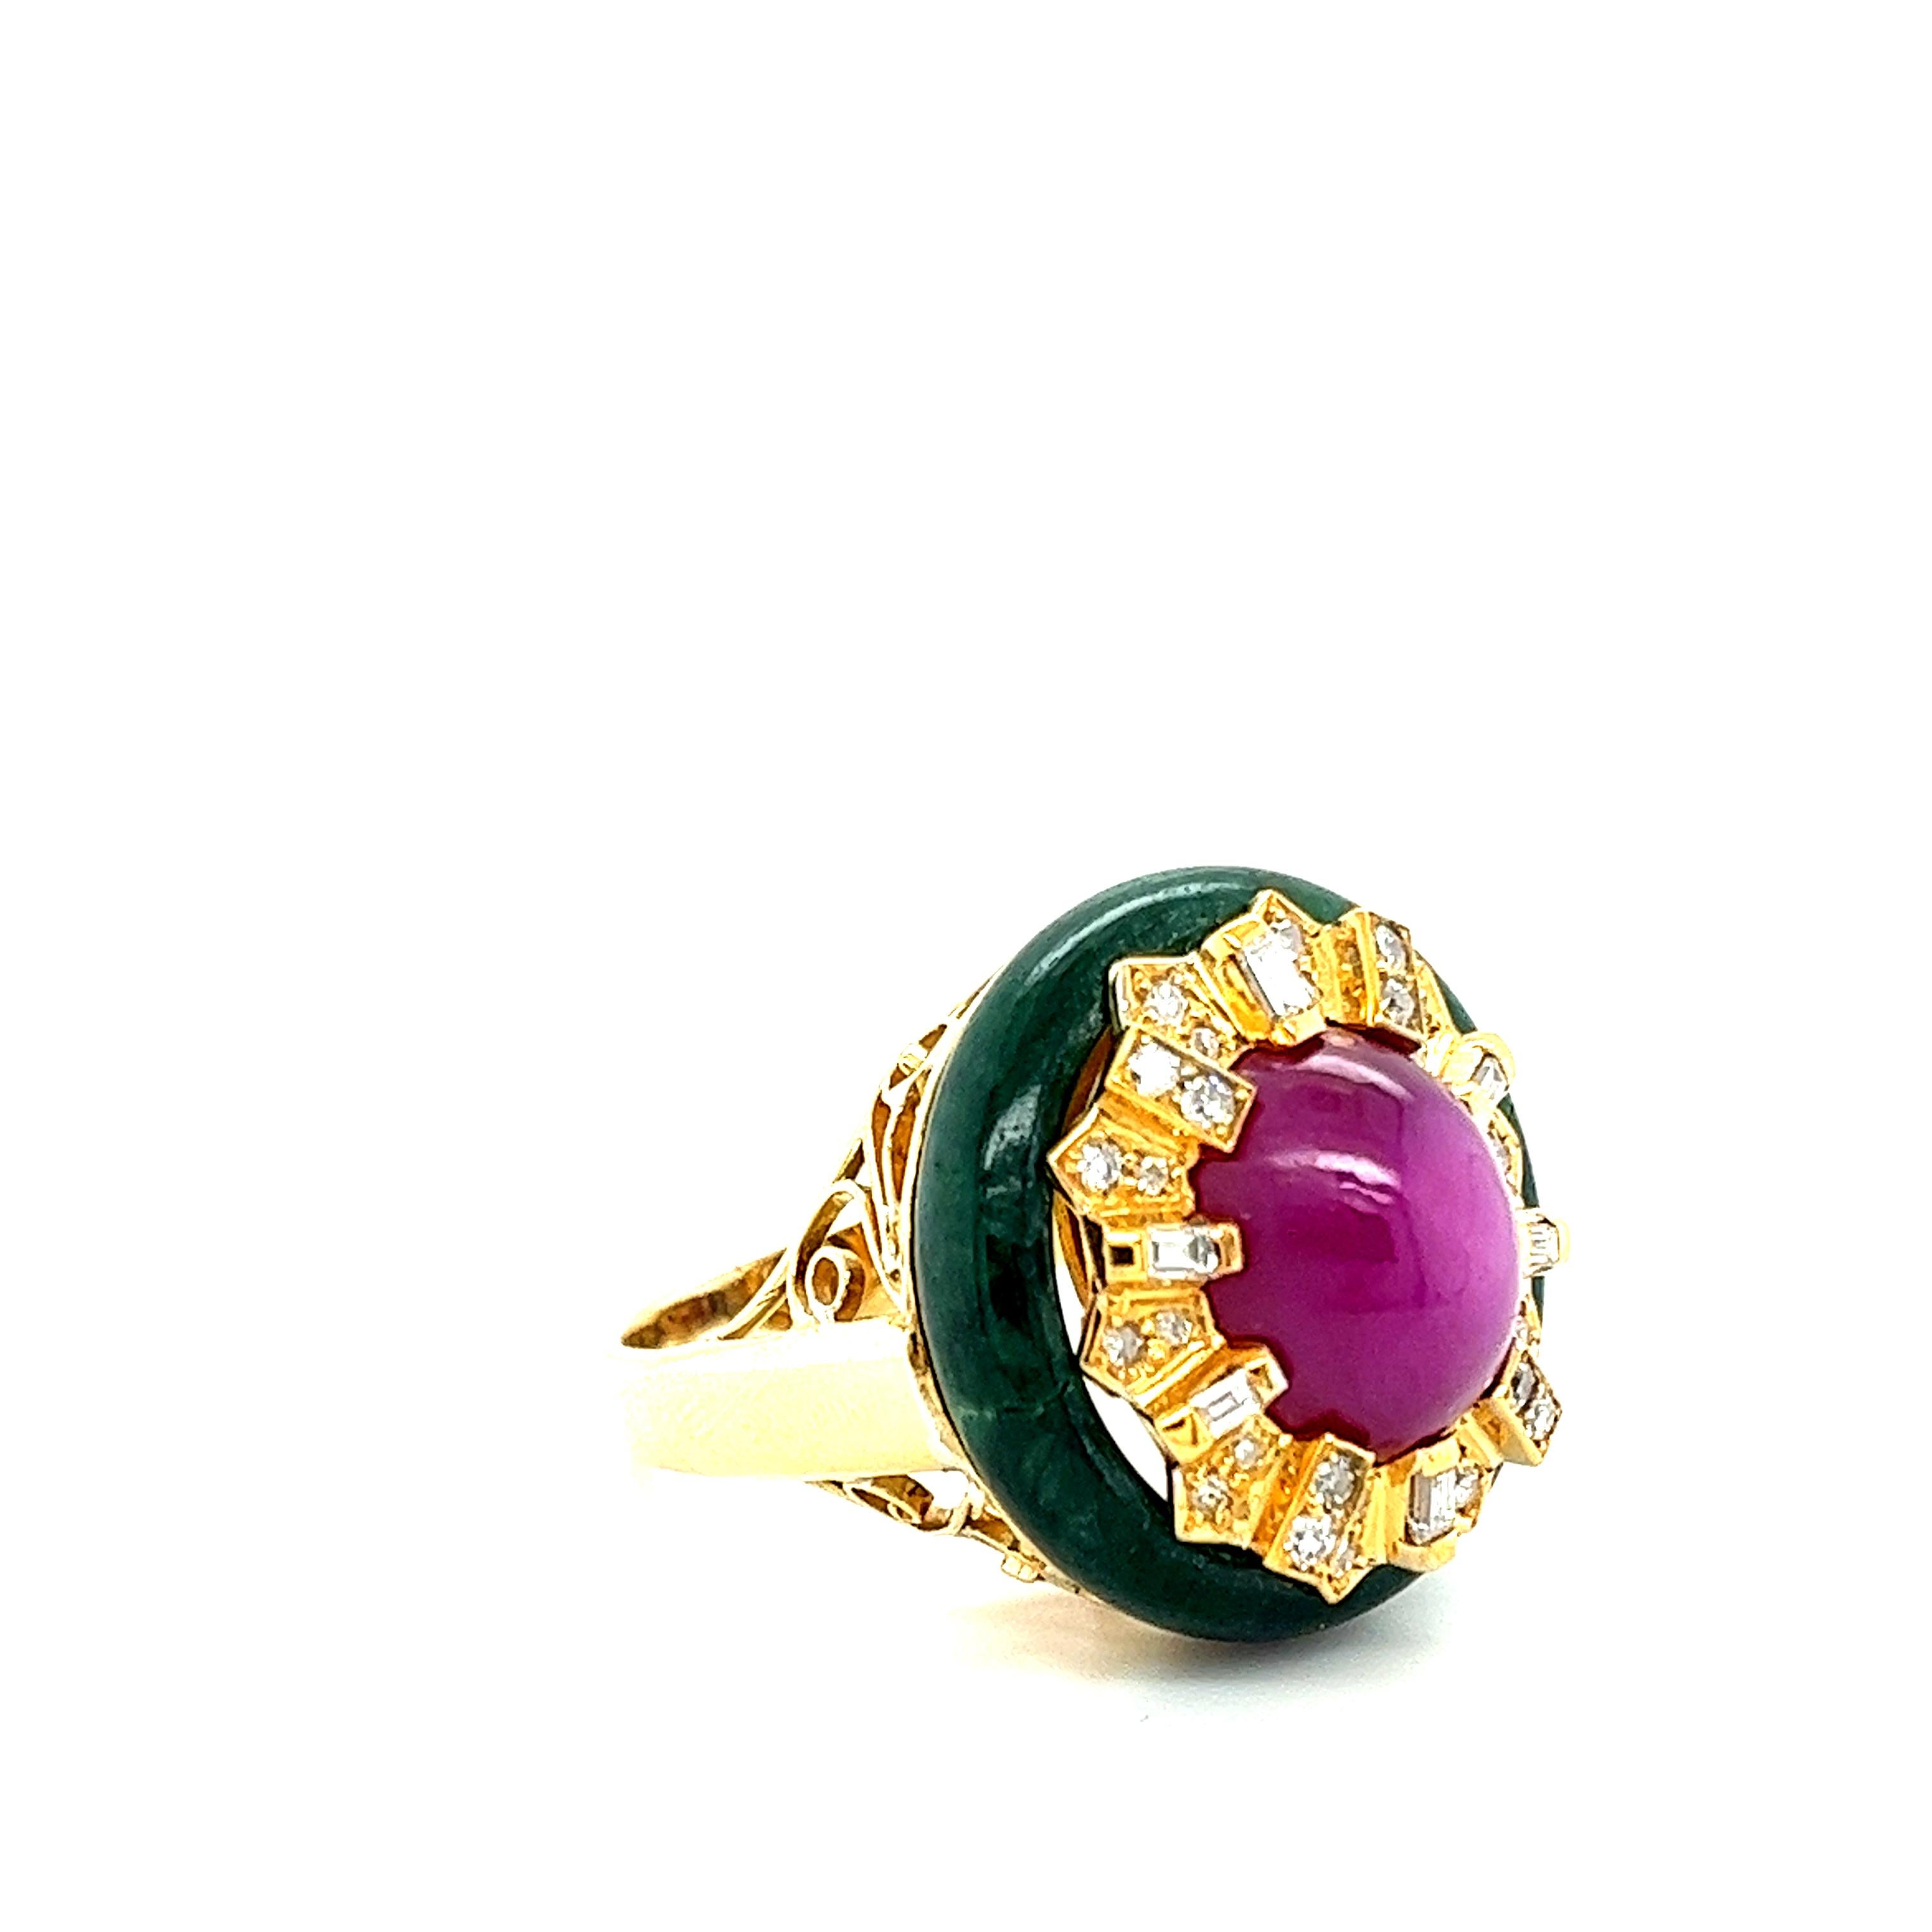 Cabochon-Cut Ruby Jade and Diamond 18K Gold Ring and Earrings Set For Sale 2